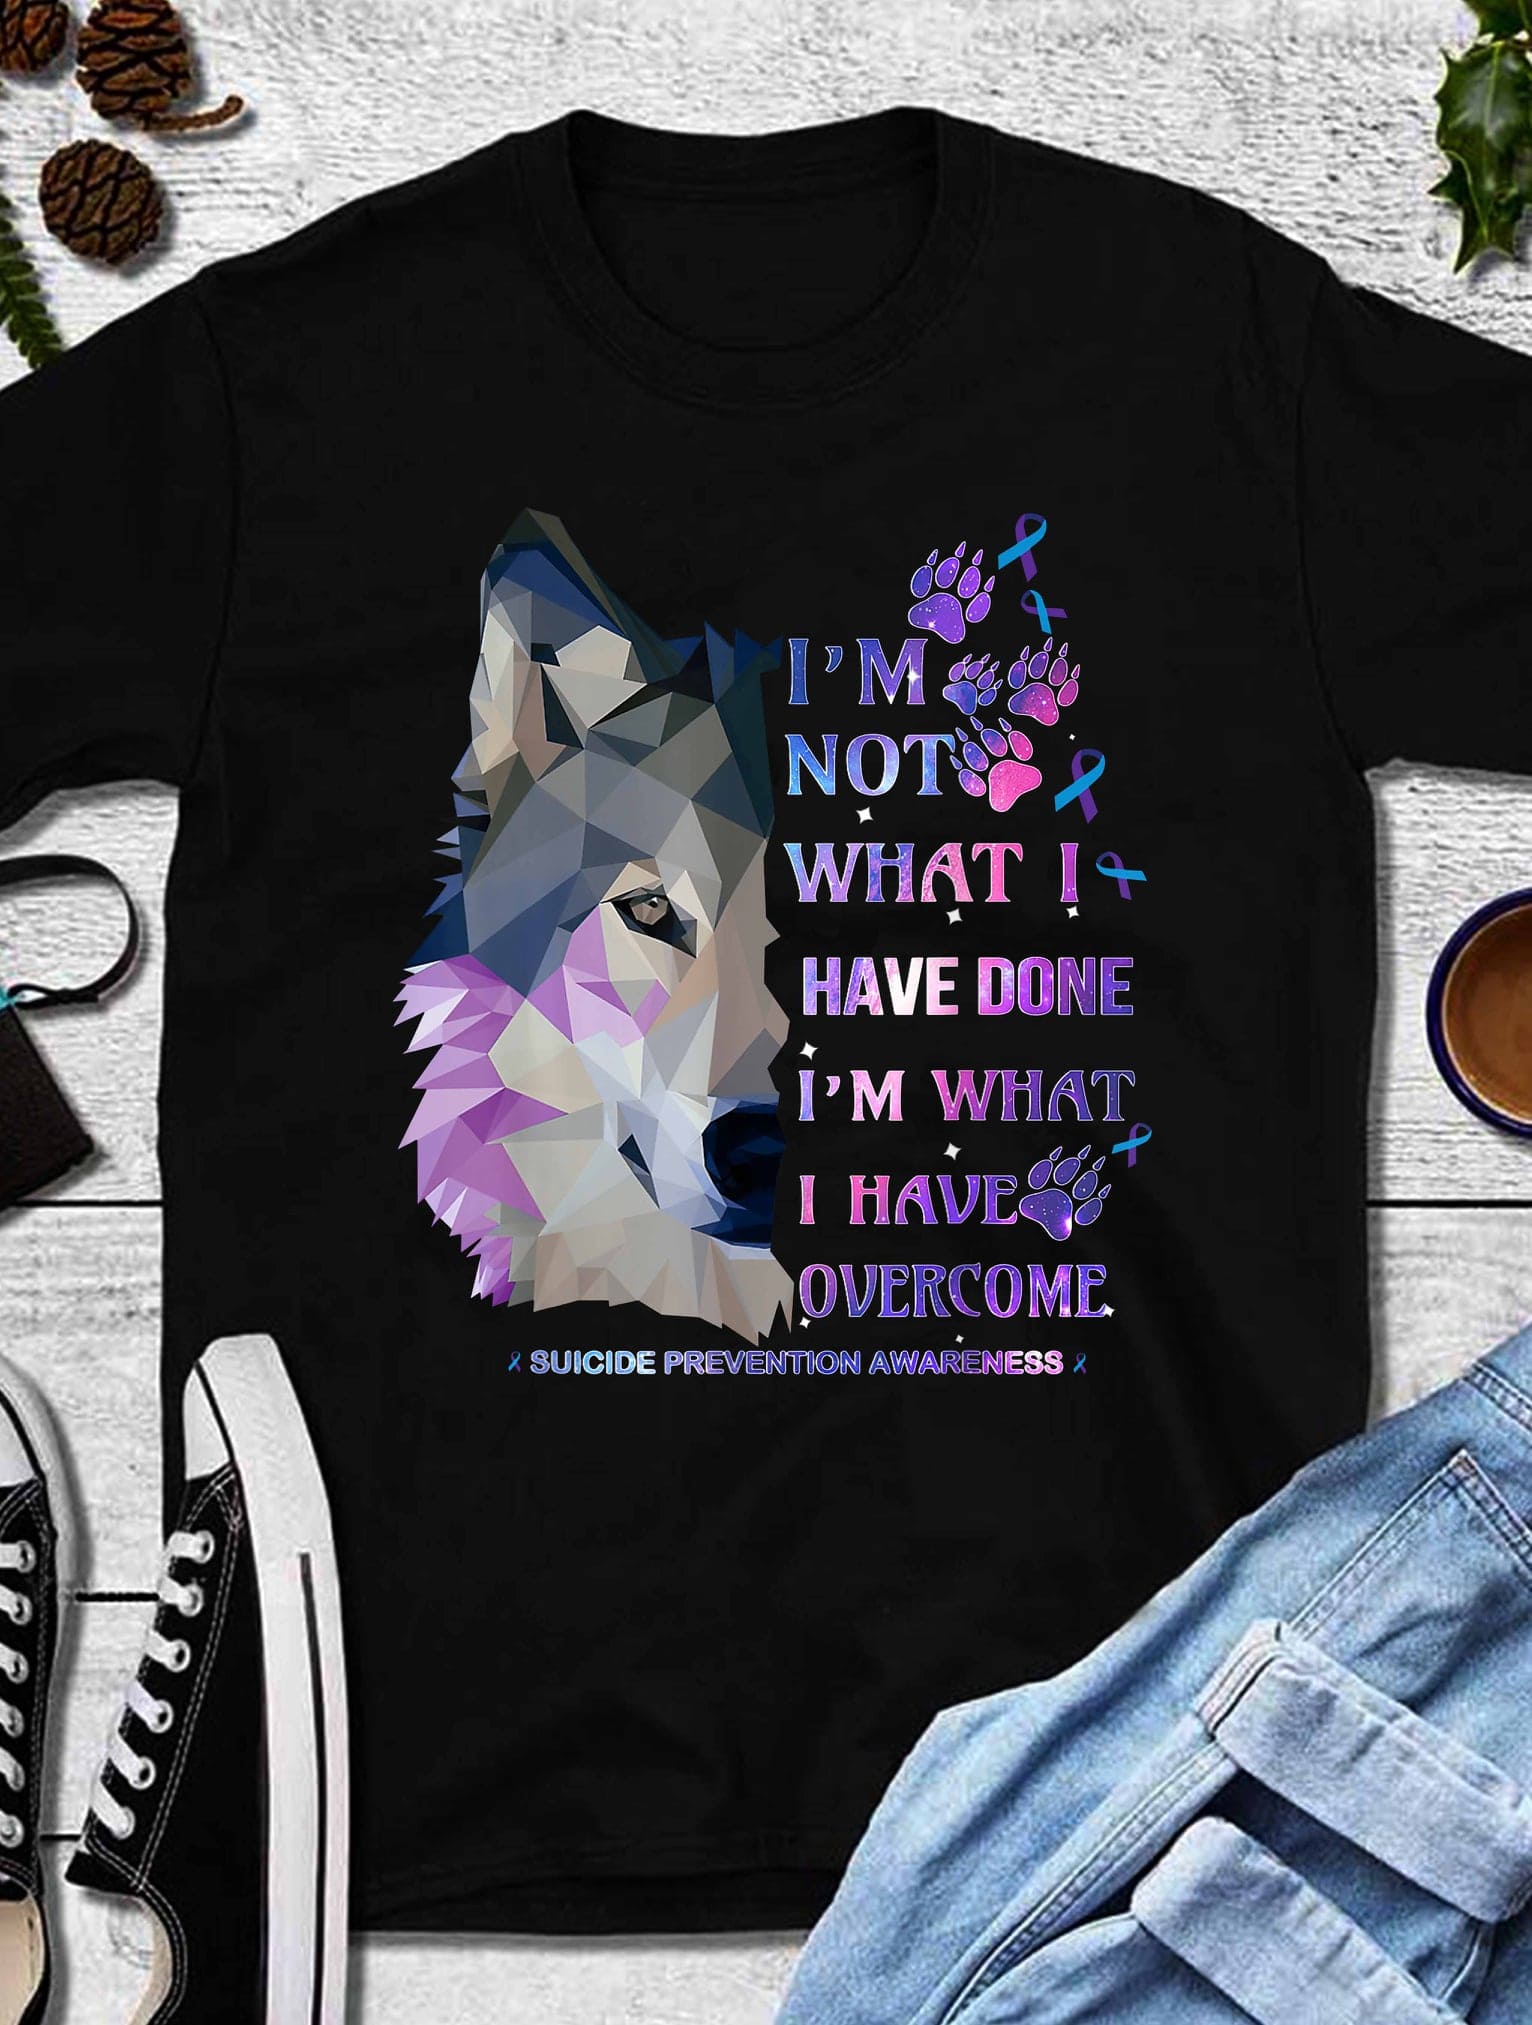 I'm not what i have done I'm what I have overcome - Suicide prevention awareness, wolf suicide prevention